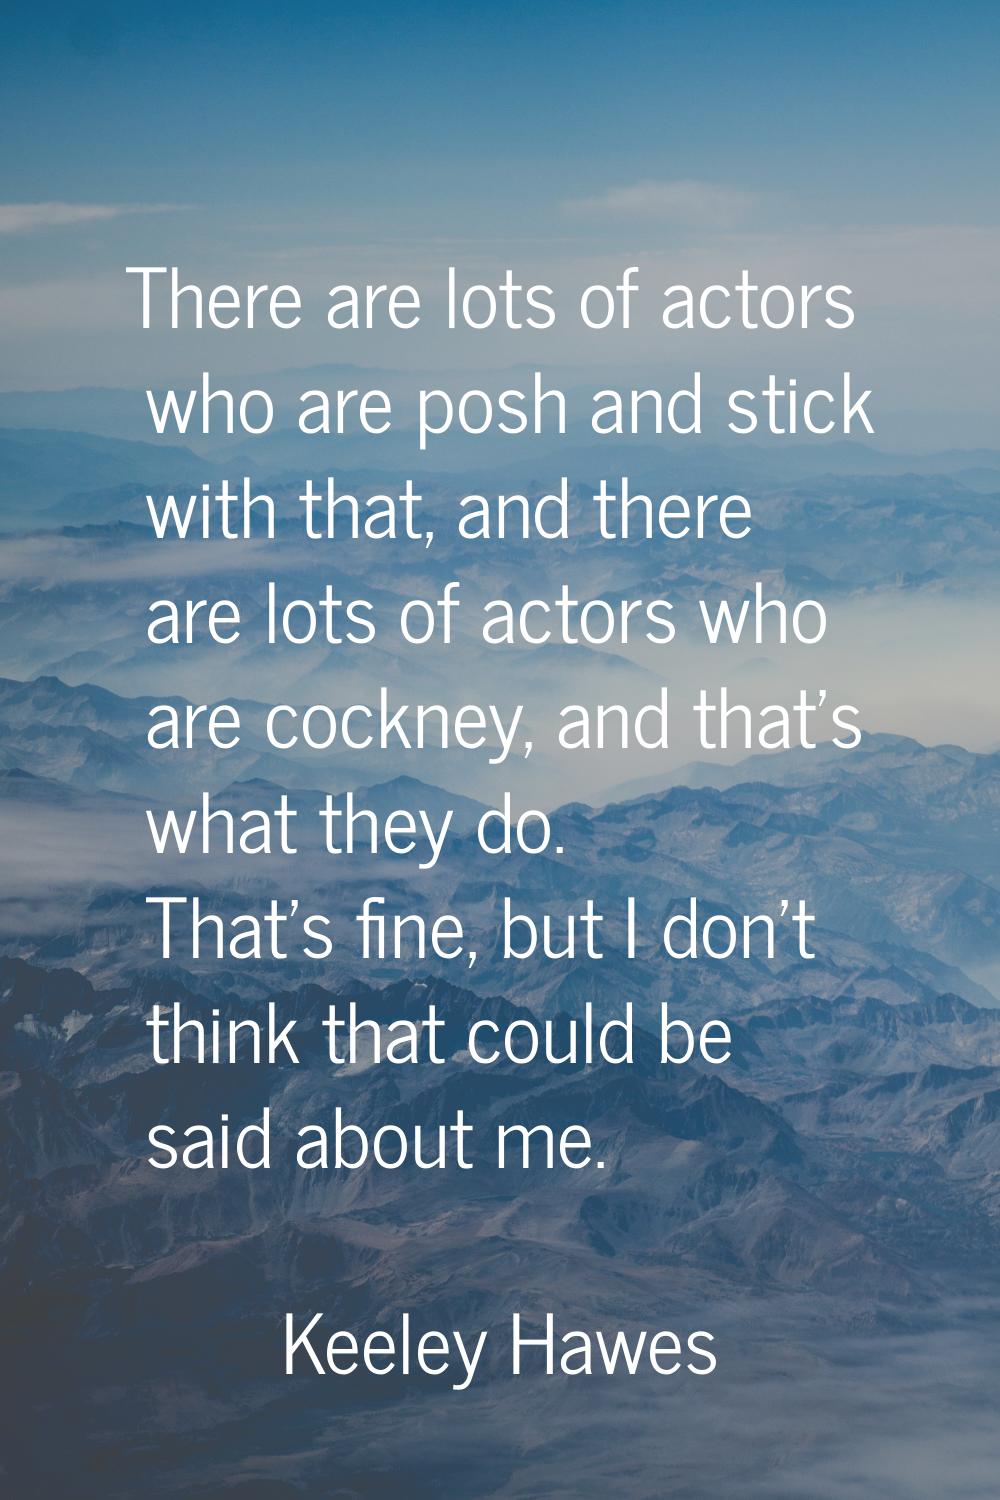 There are lots of actors who are posh and stick with that, and there are lots of actors who are coc